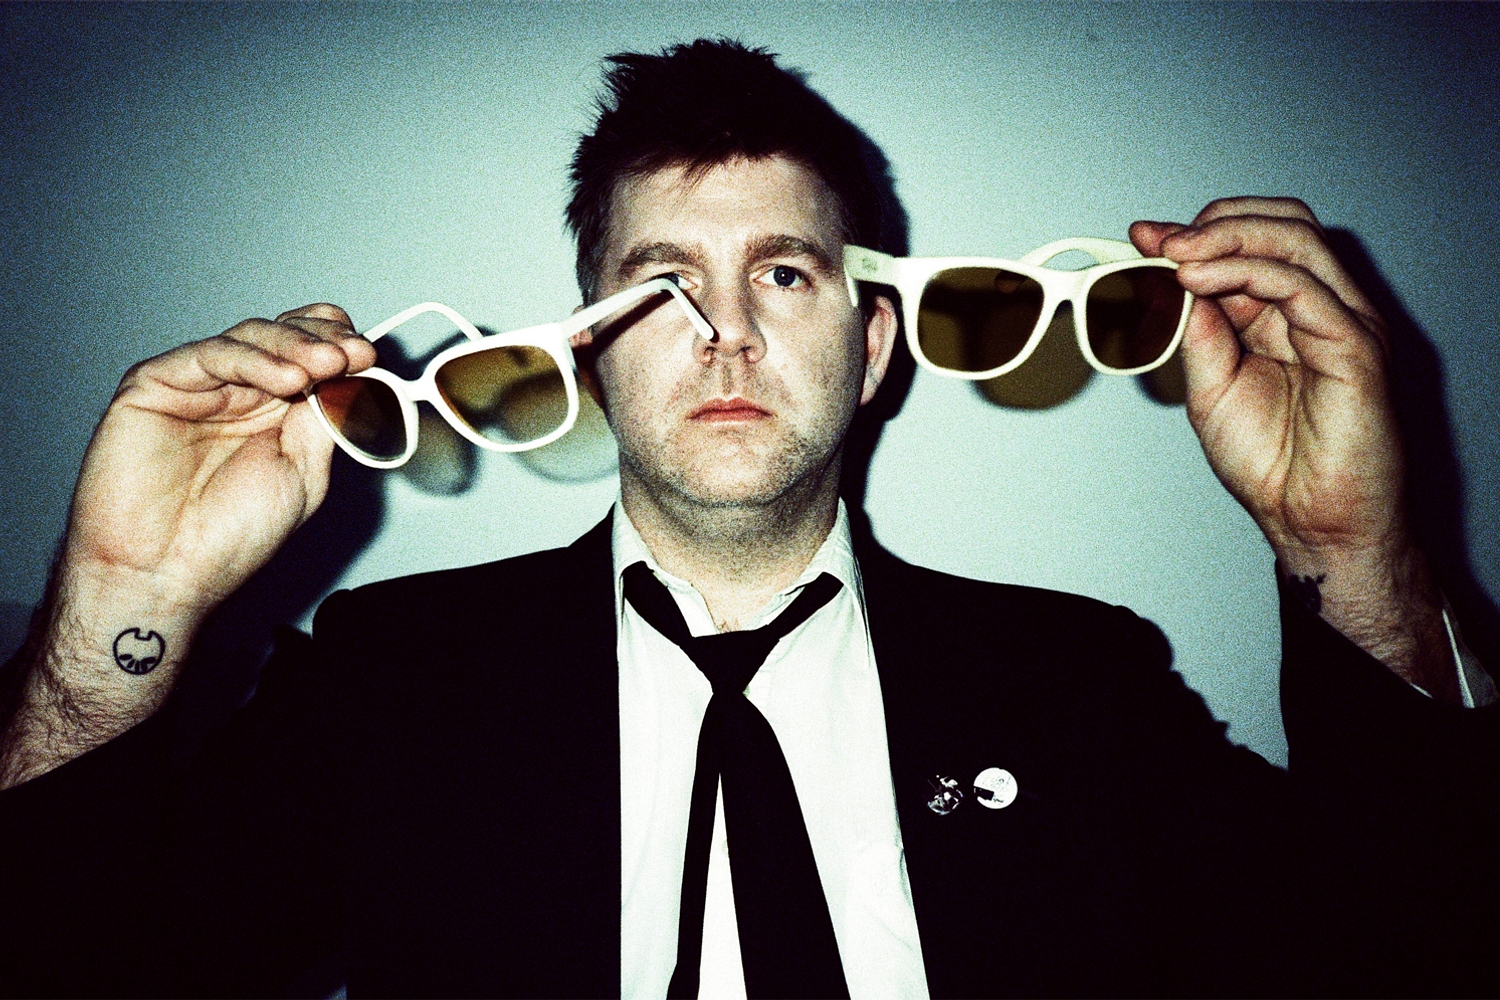 LCD Soundsystem and Guns N’ Roses are set to play Coachella 2016